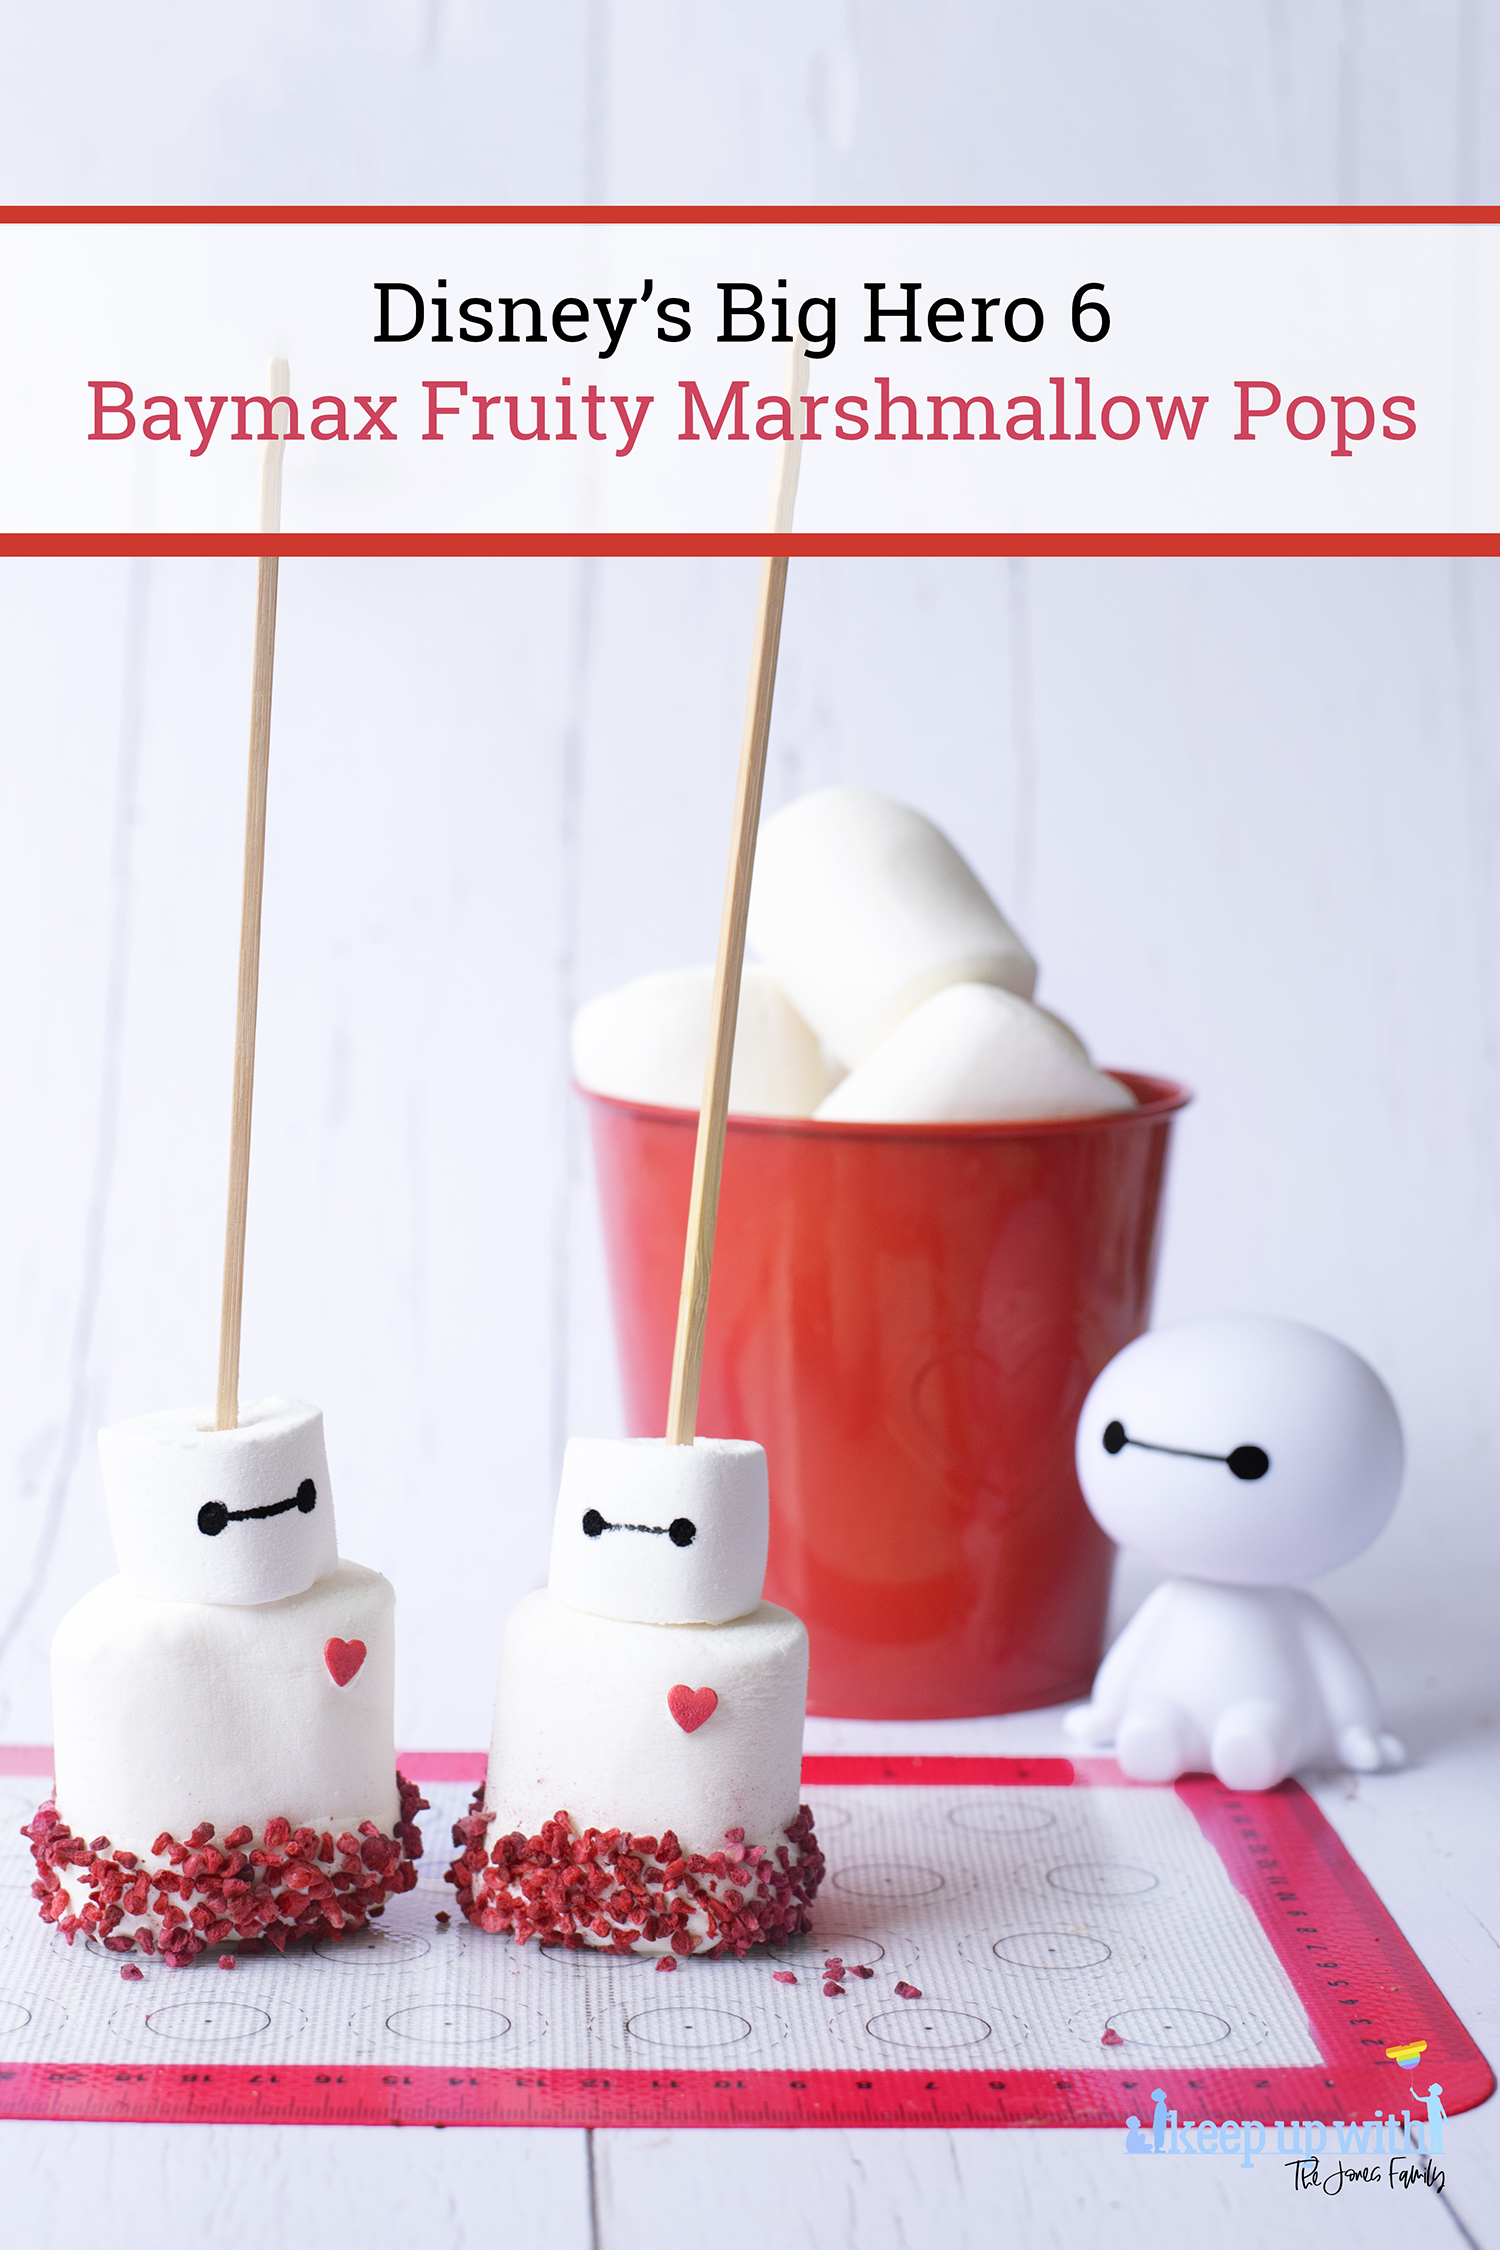 Image shows how to make Disney's Big Hero 6 Baymax Fruity Marshmallow Pops. Image by Keep Up With The Jones Family.